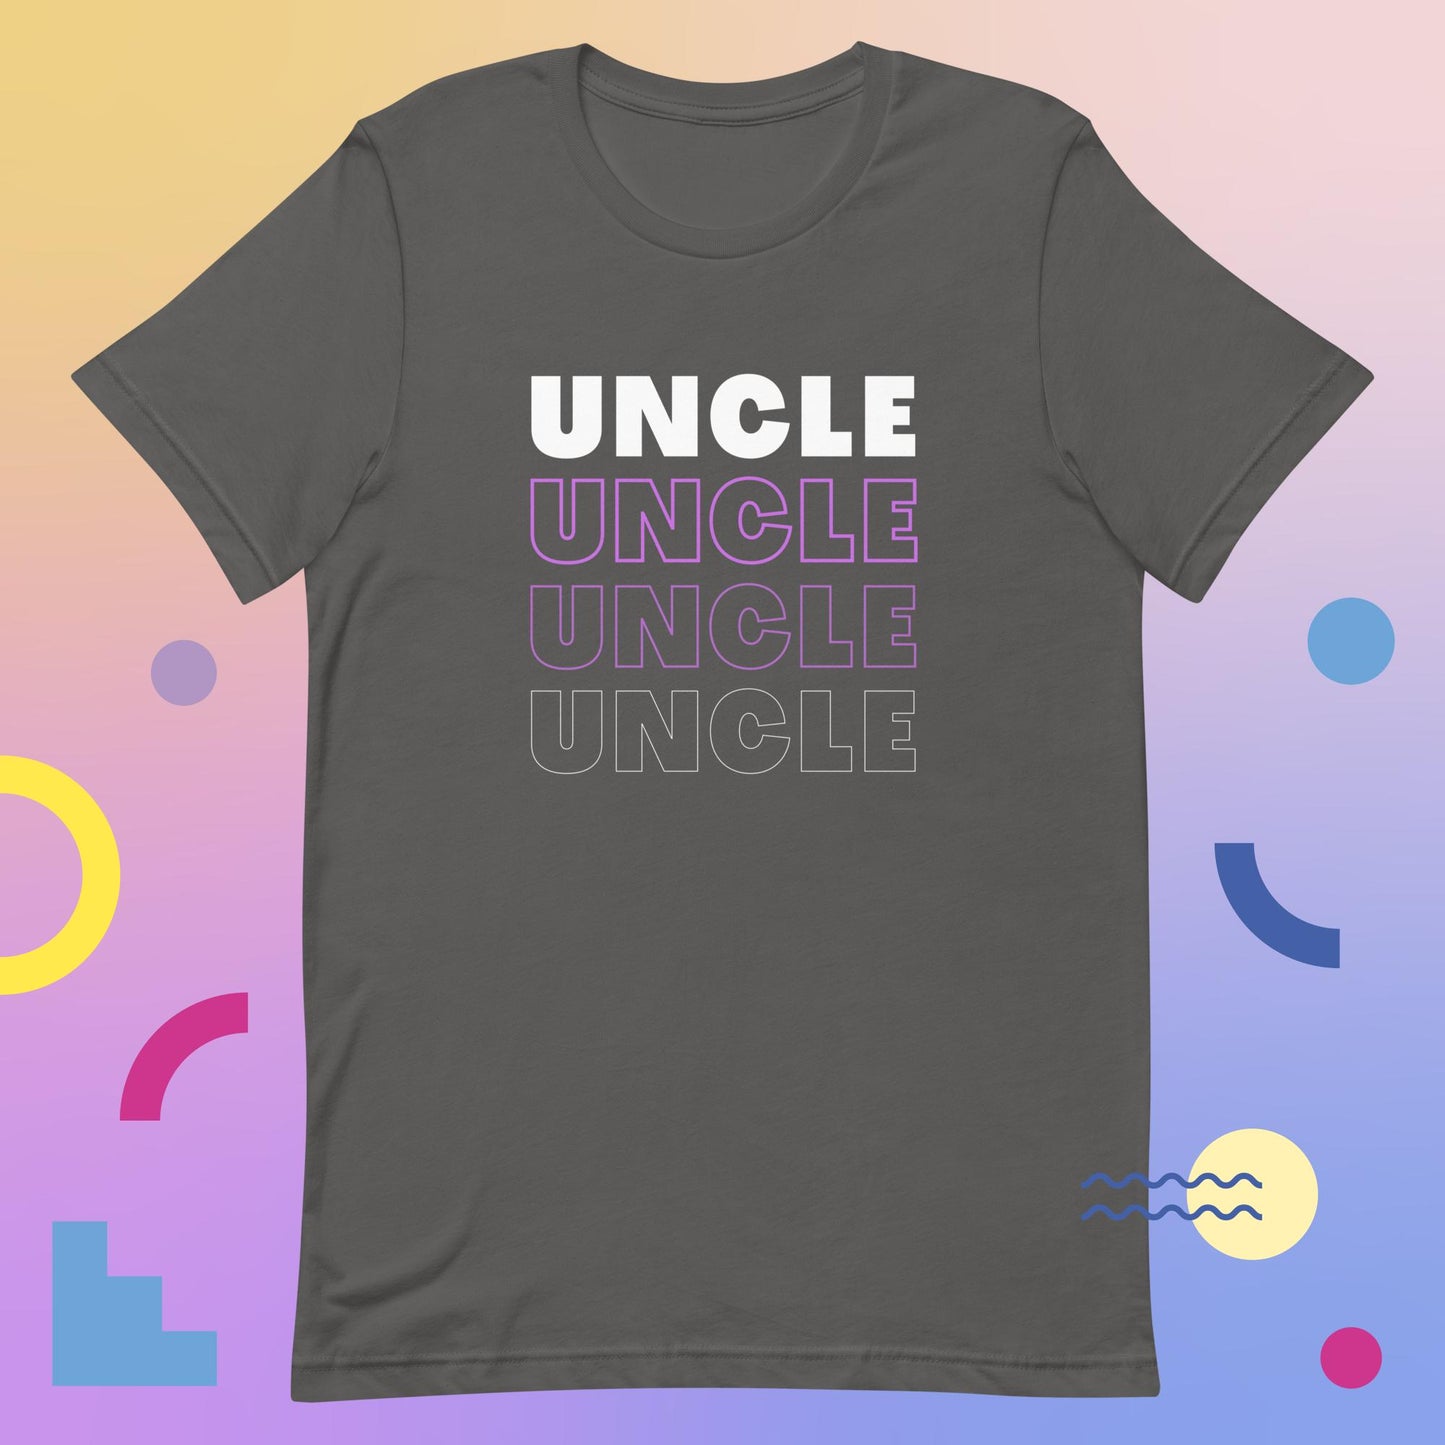 (Uncle) Family Tees Unisex t-shirt